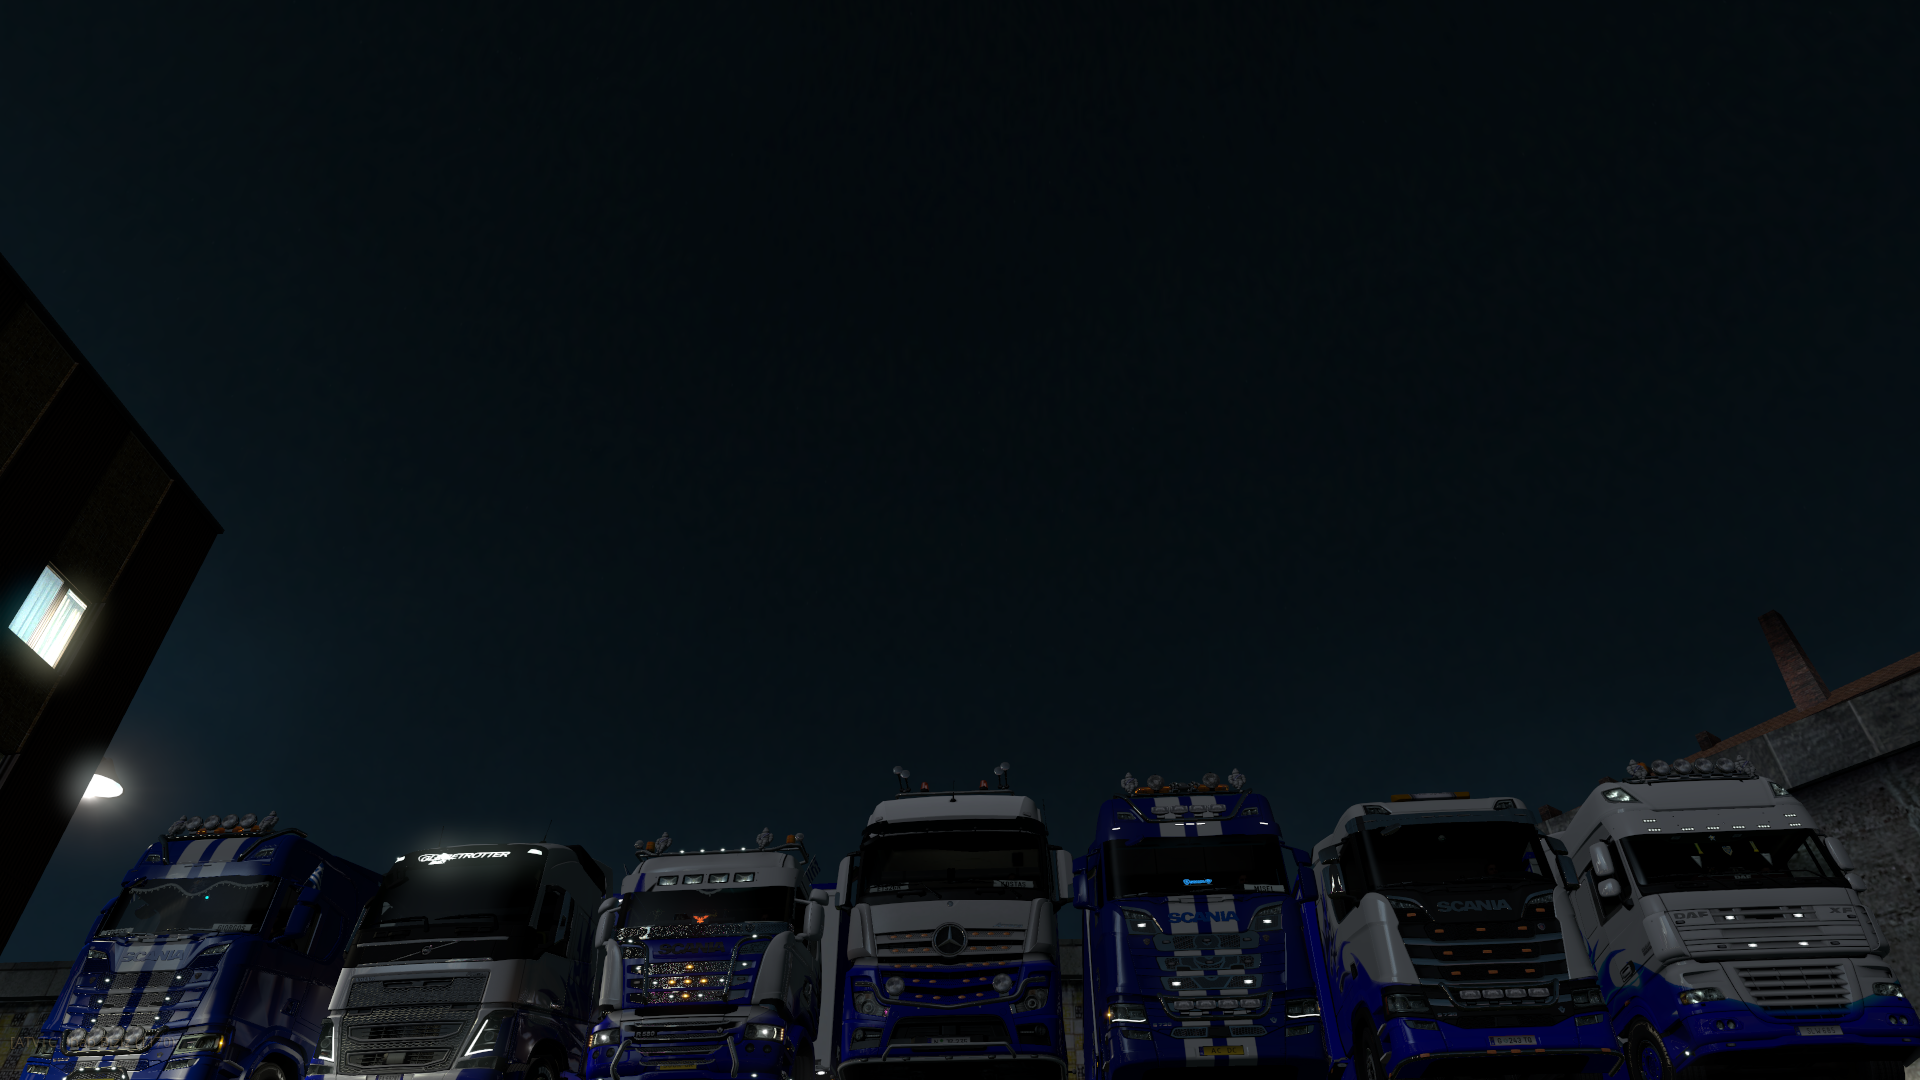 ets2_20200221_214818_00.png